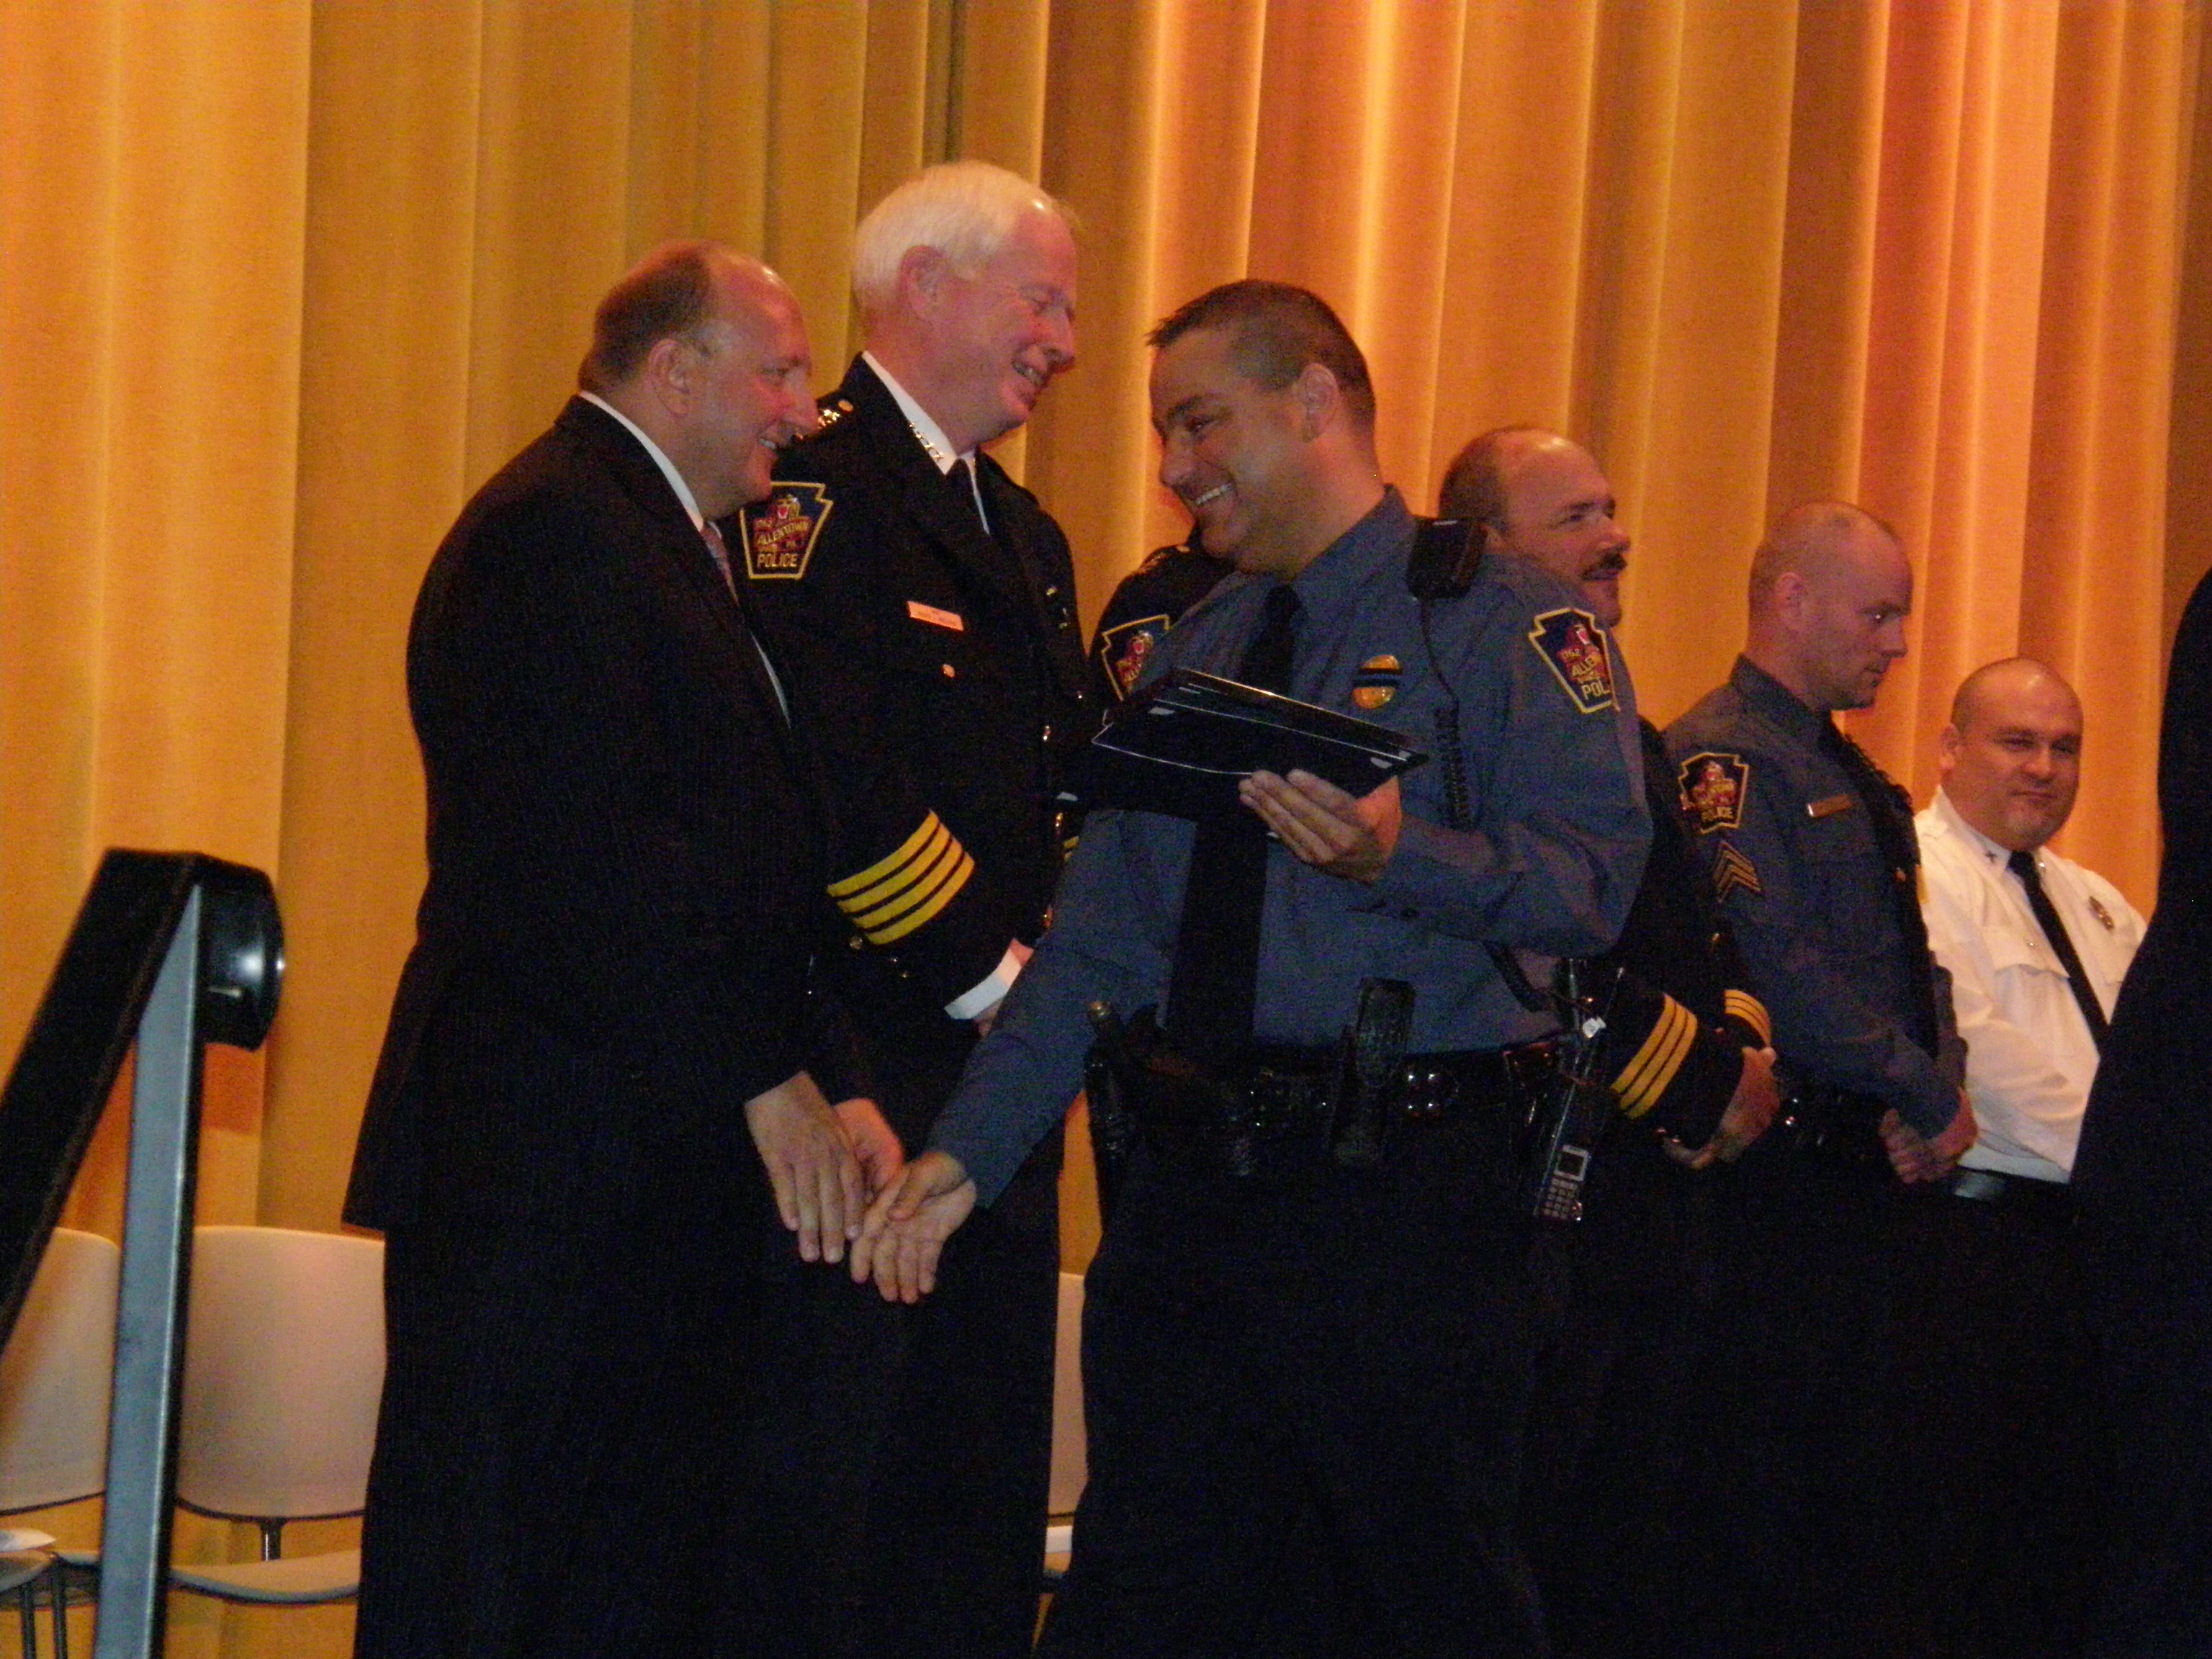 APD Commendations Awarded